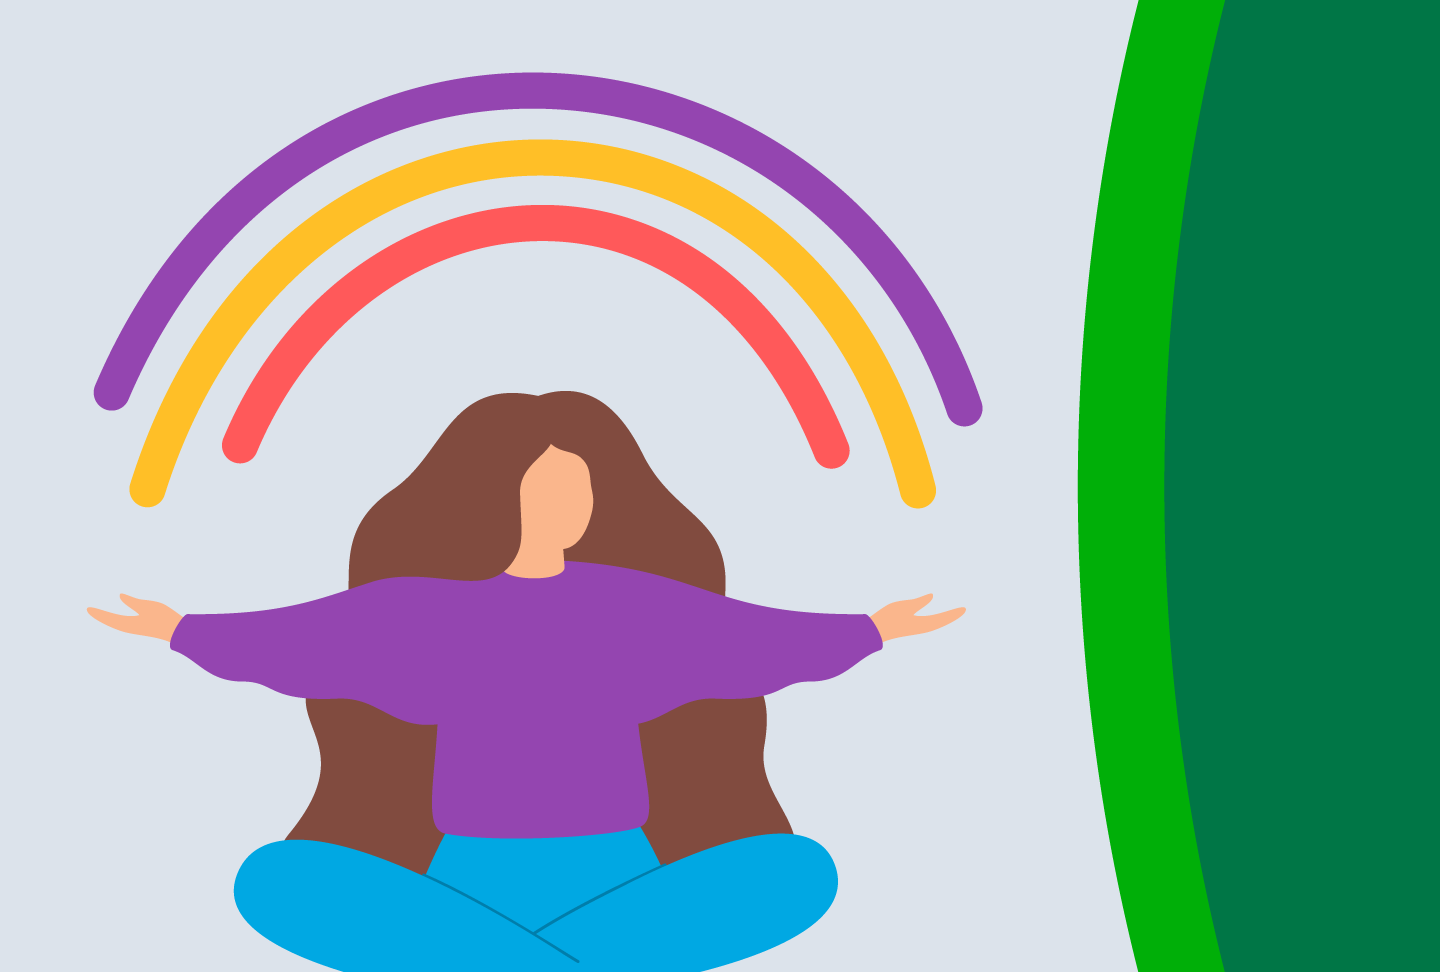 Illustration of a woman practicing yoga under a rainbow.